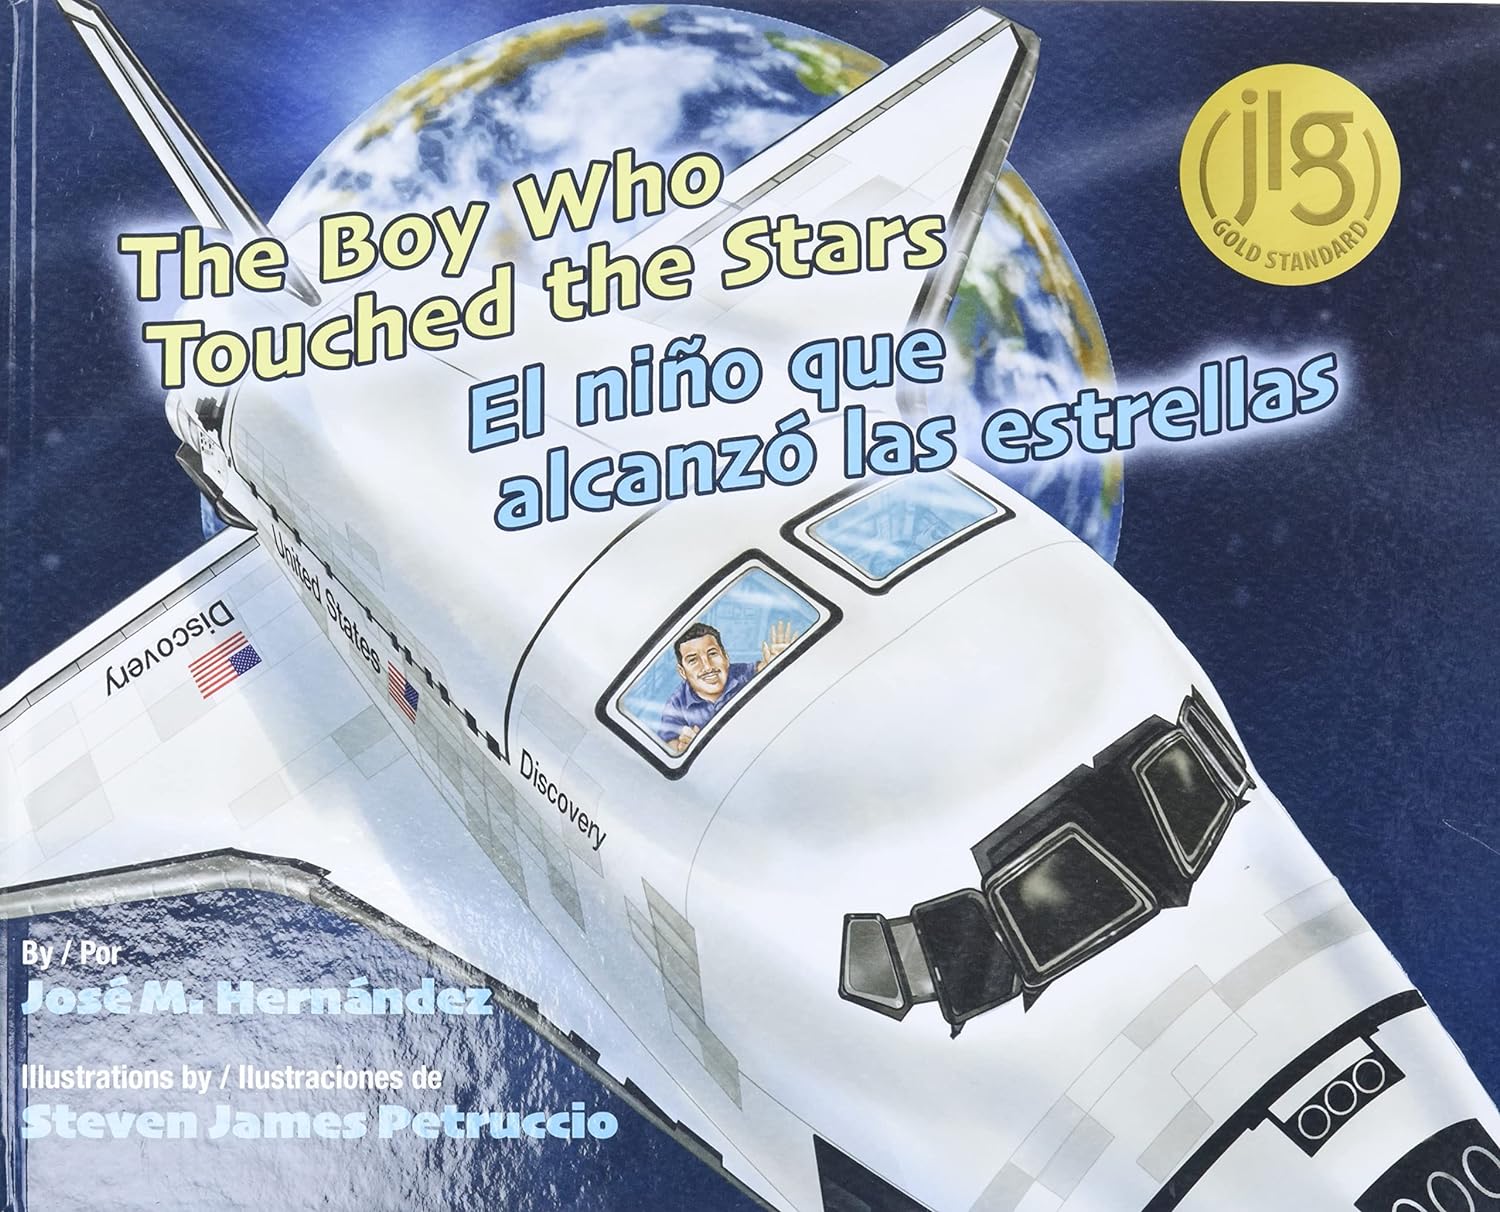 The Boy Who Touched The Stars